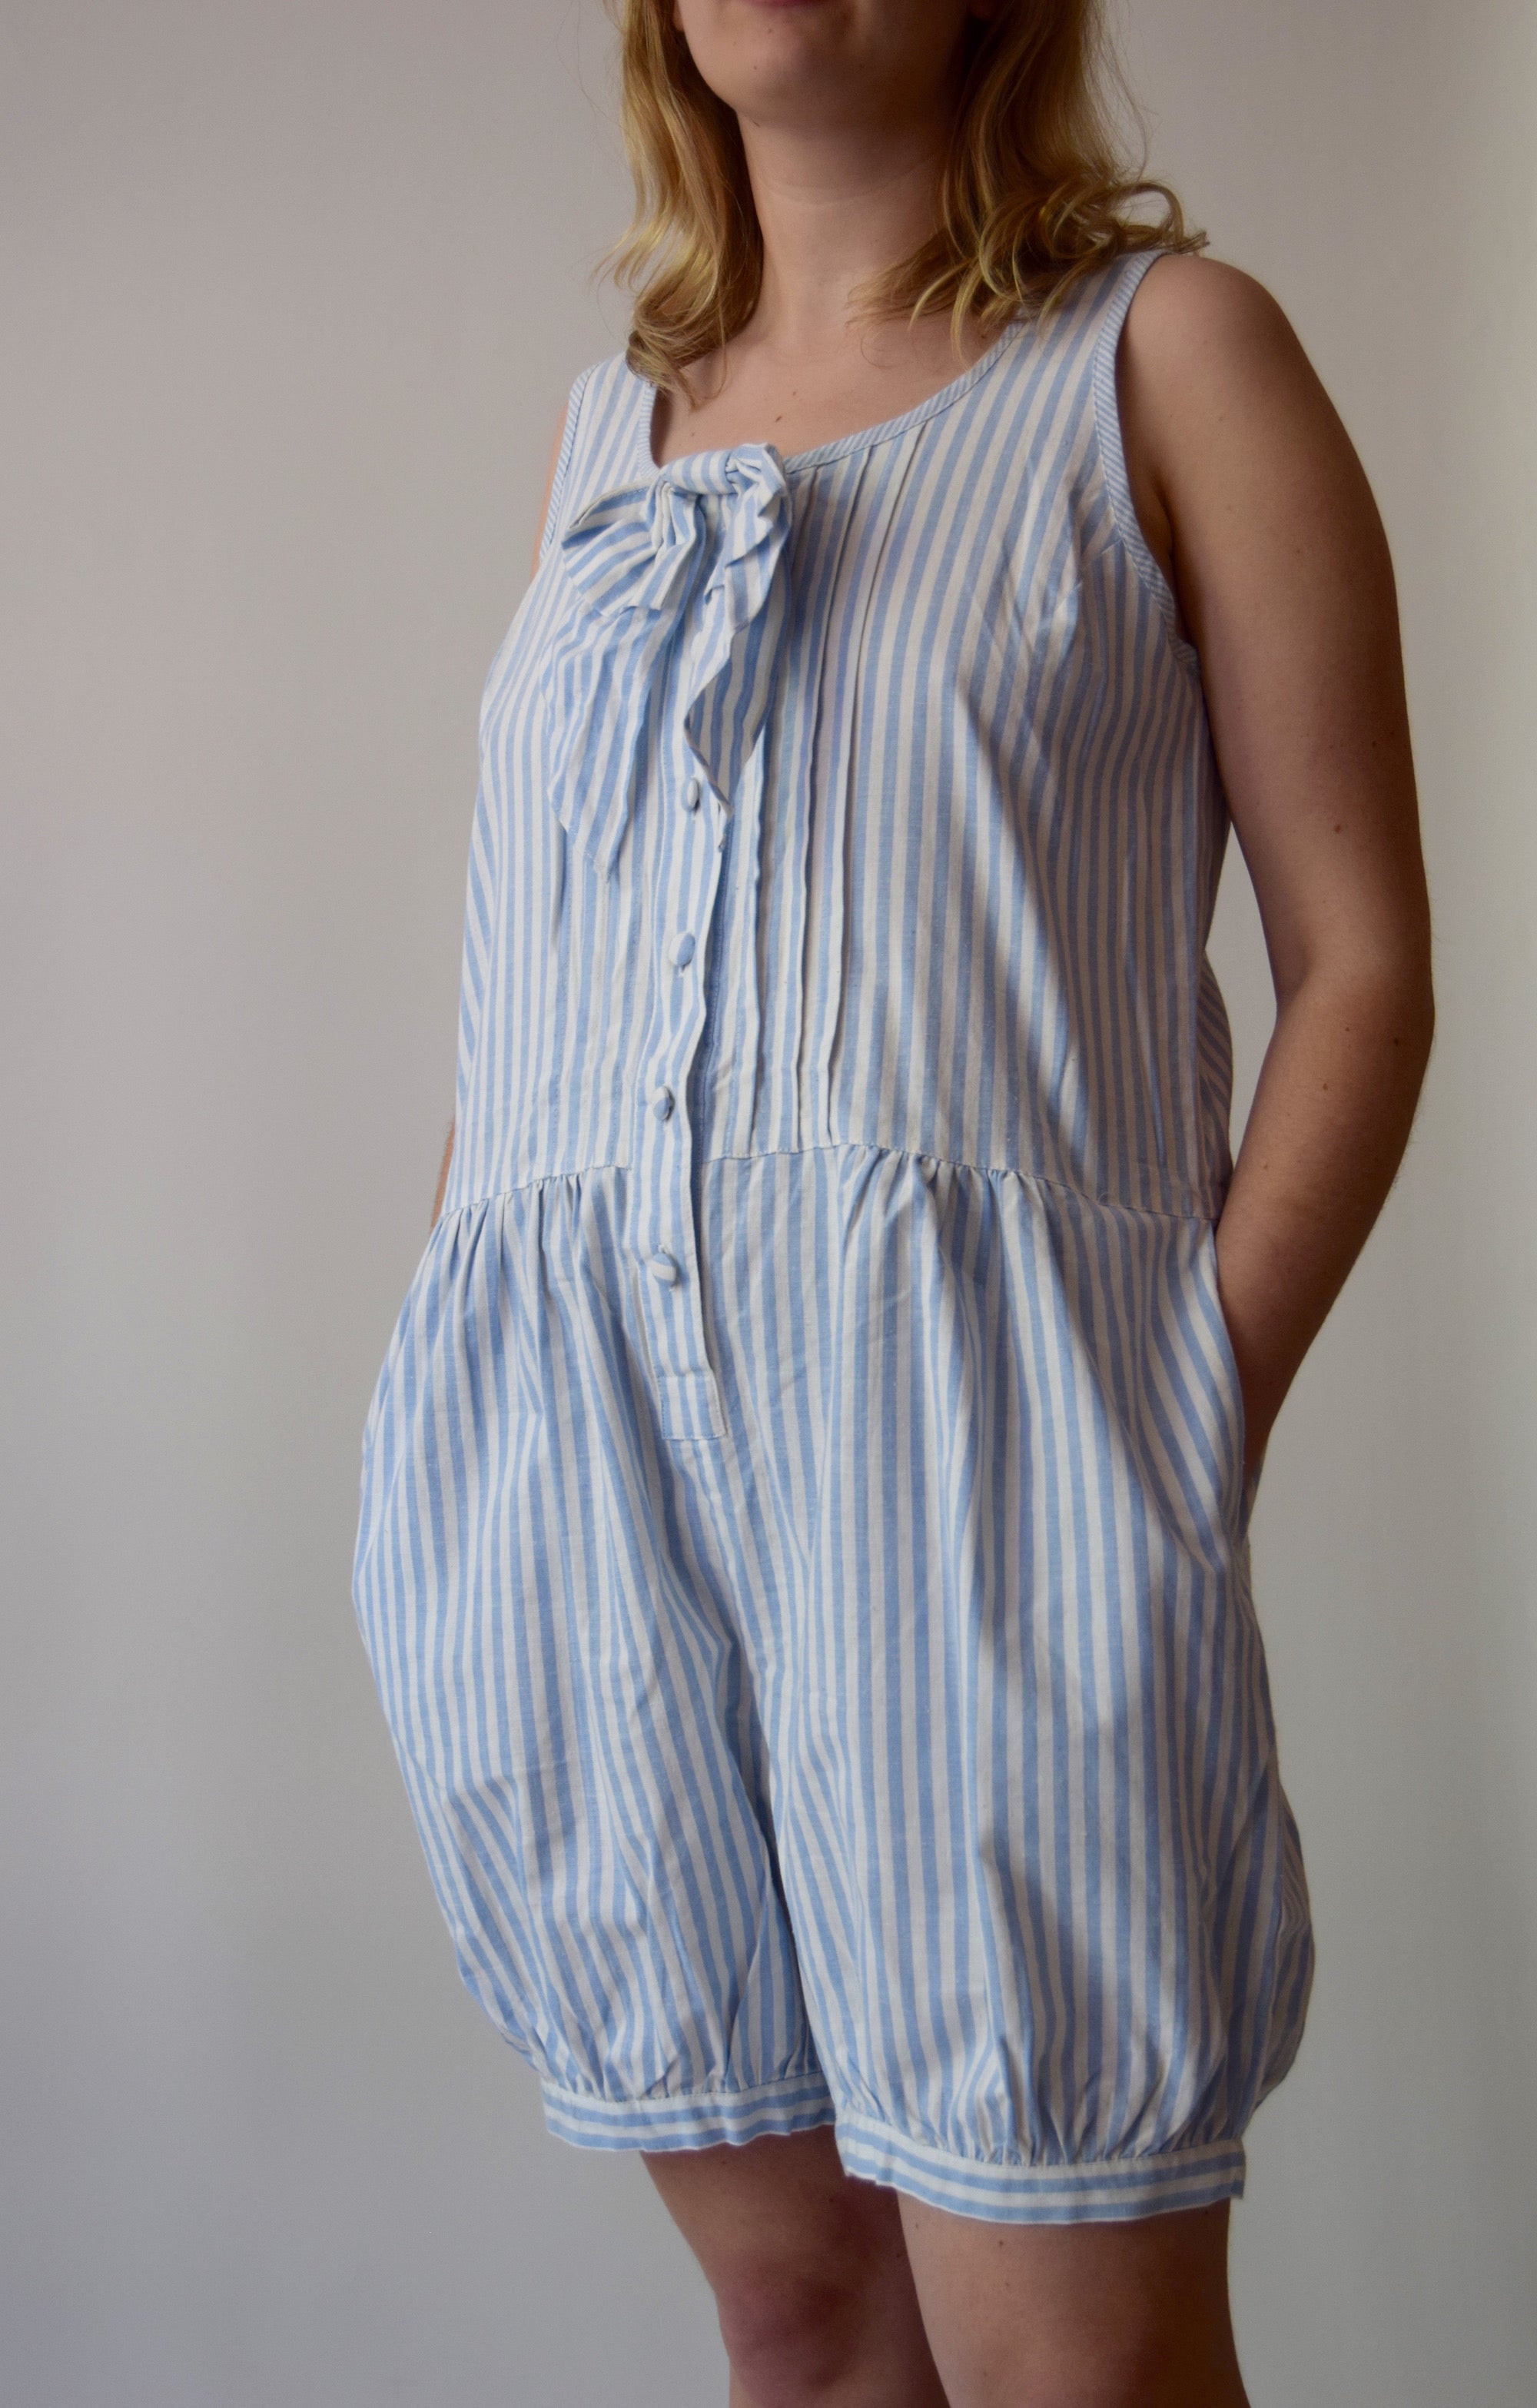 Vintage Blue and White Candy Stripe Romper